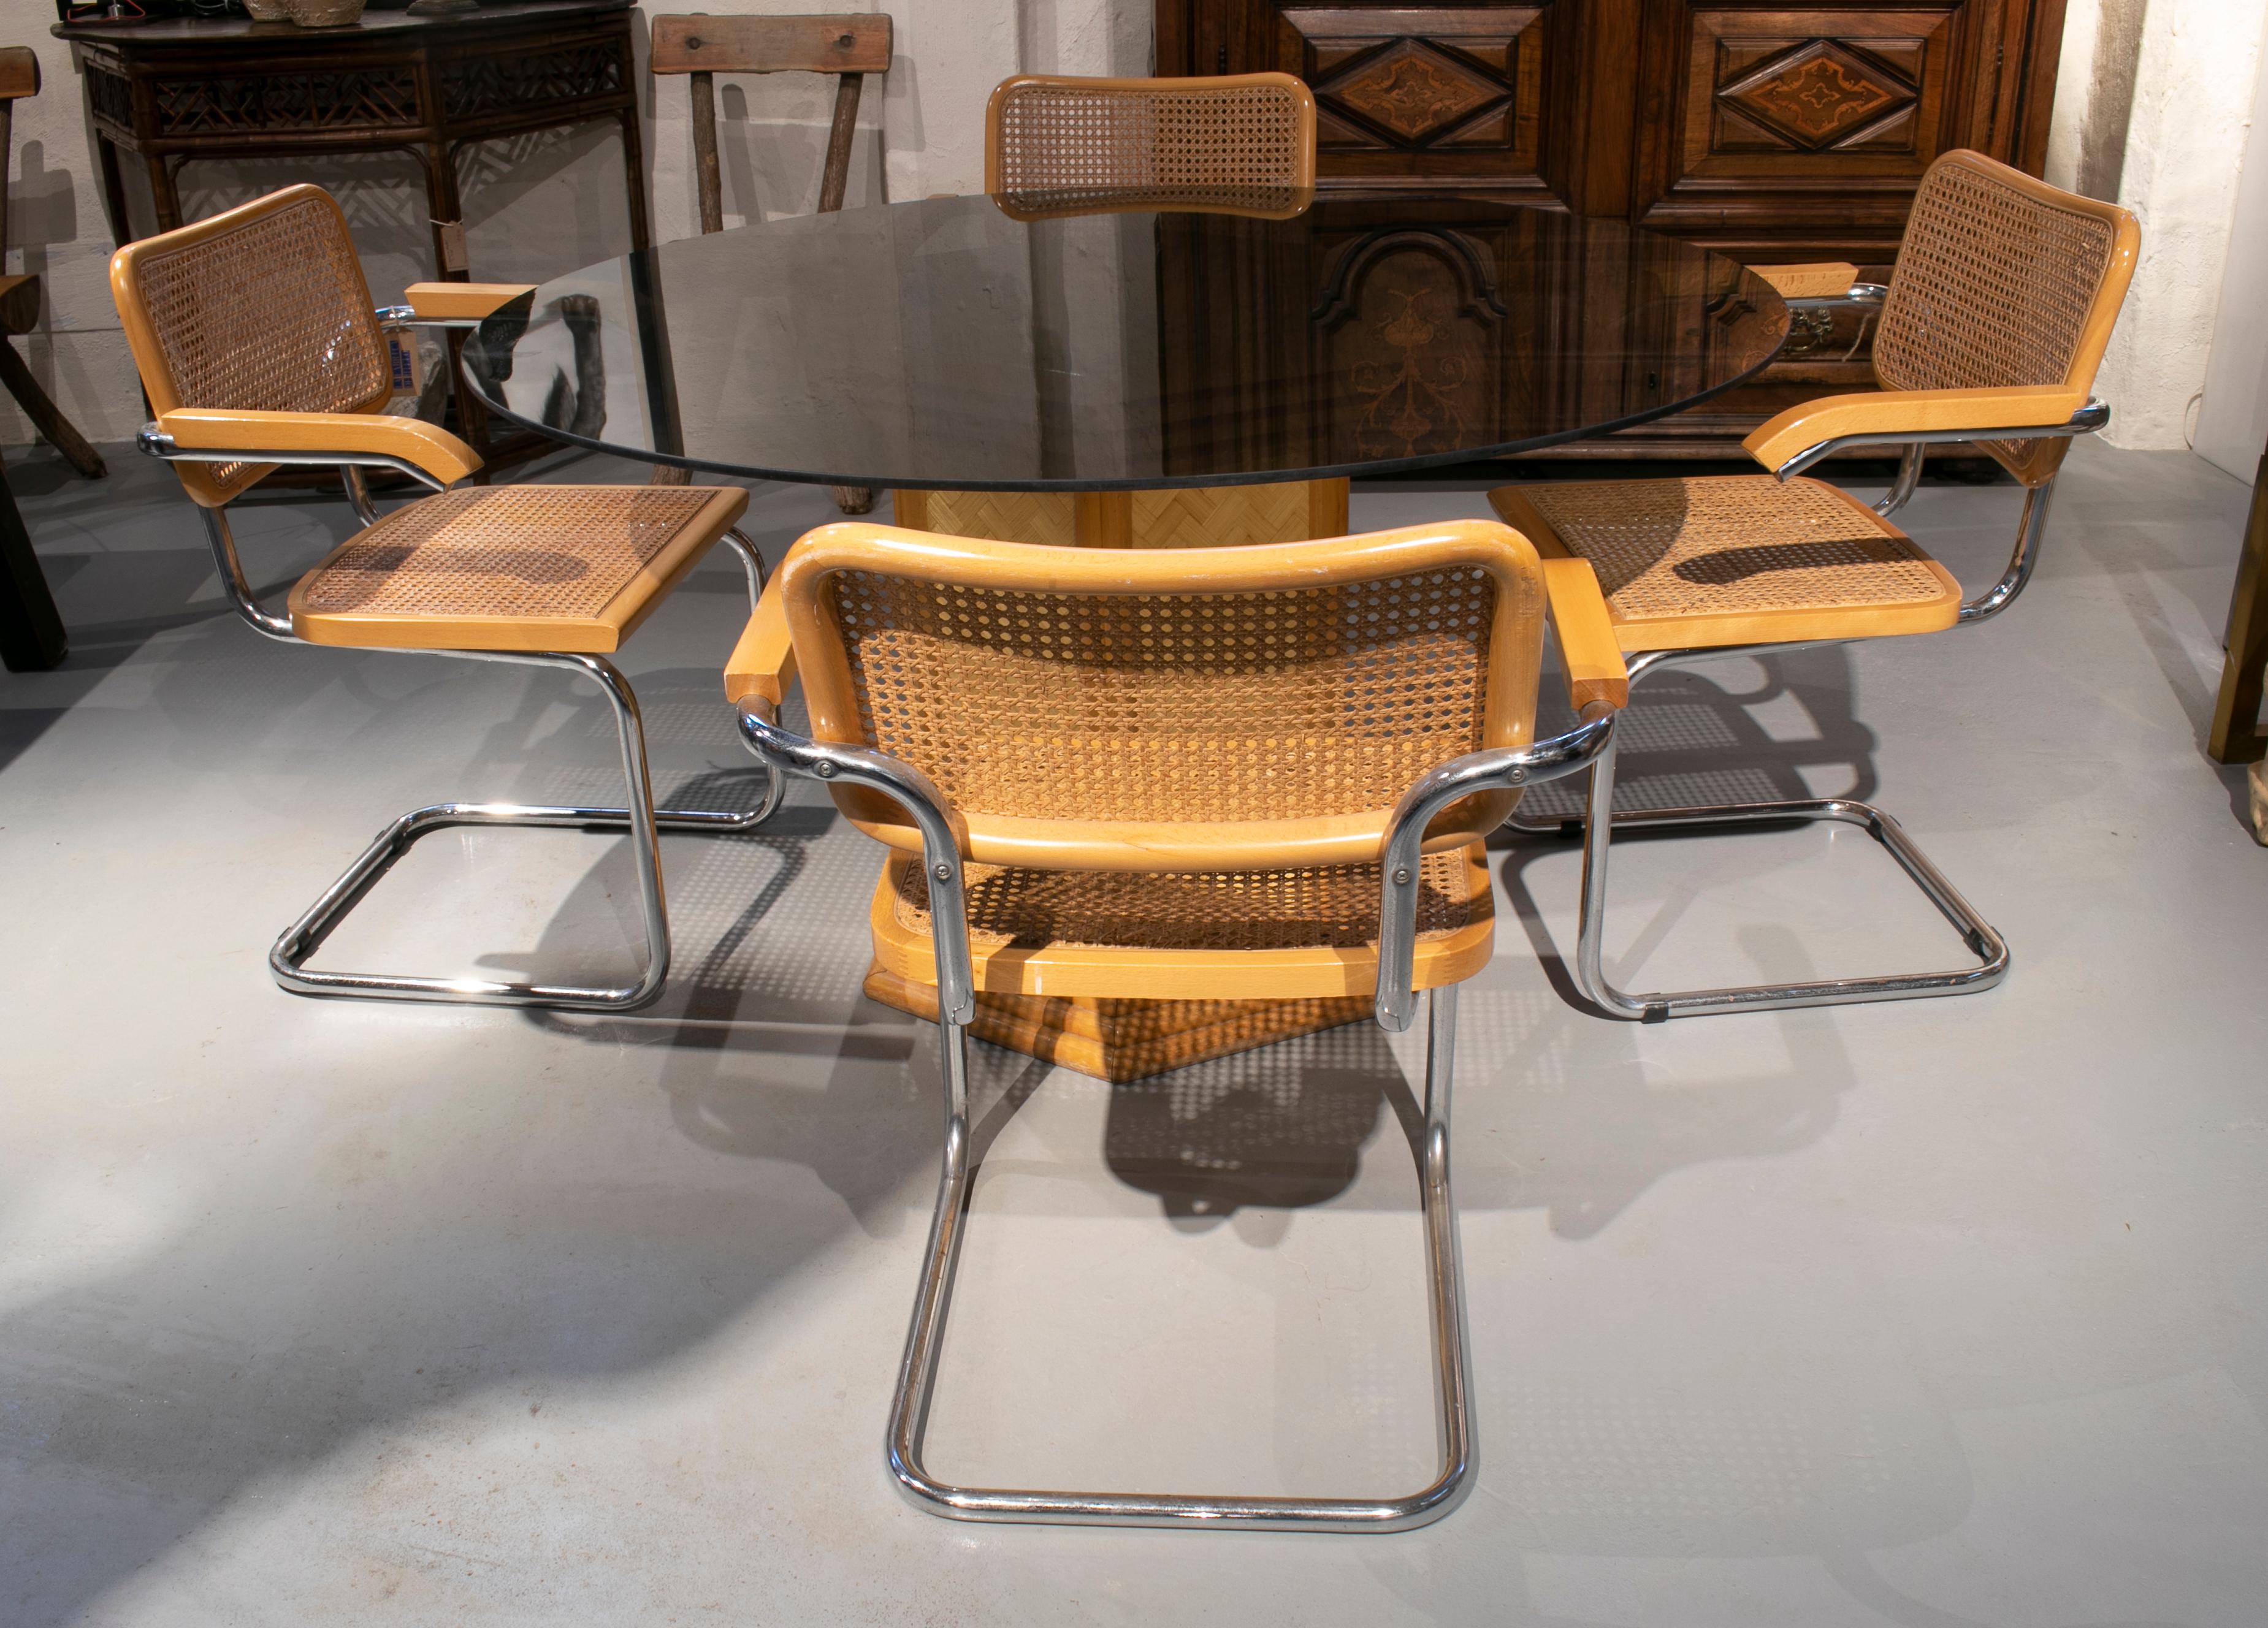 1970s set of Italian bamboo and crystal table with four Cesca chairs.

Armchairs measurements: 81 x 61 x 56cm
Table measurements: 74 x 130cm.